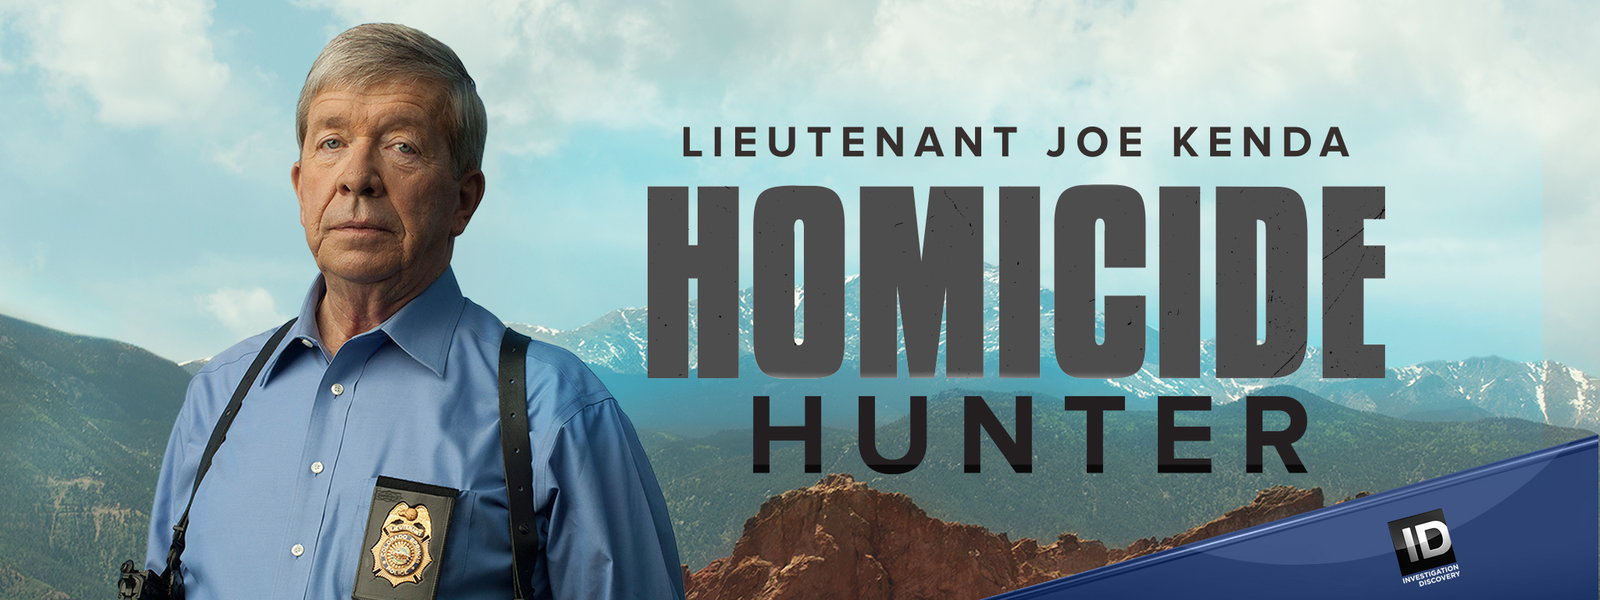 Don't Miss The 6th Season of Homicide Hunter Returning August 24!